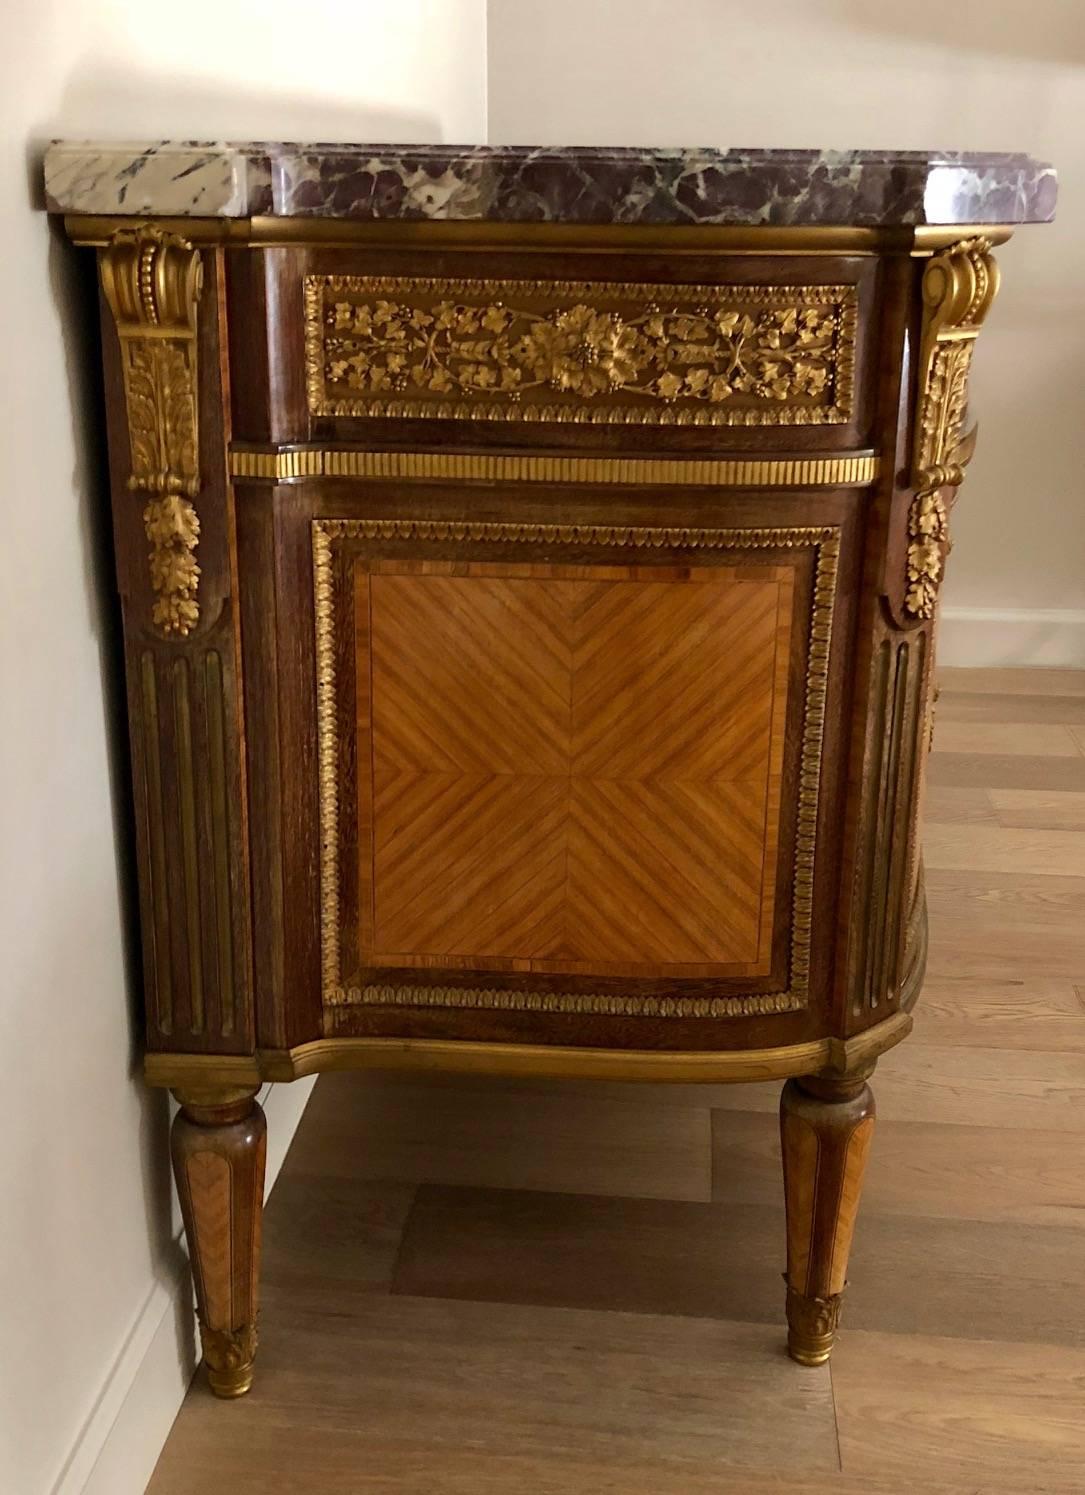 19th Century Fine French Louis XVI Style Gilt Bronze-Mounted Cabinet by Frédéric Schmit